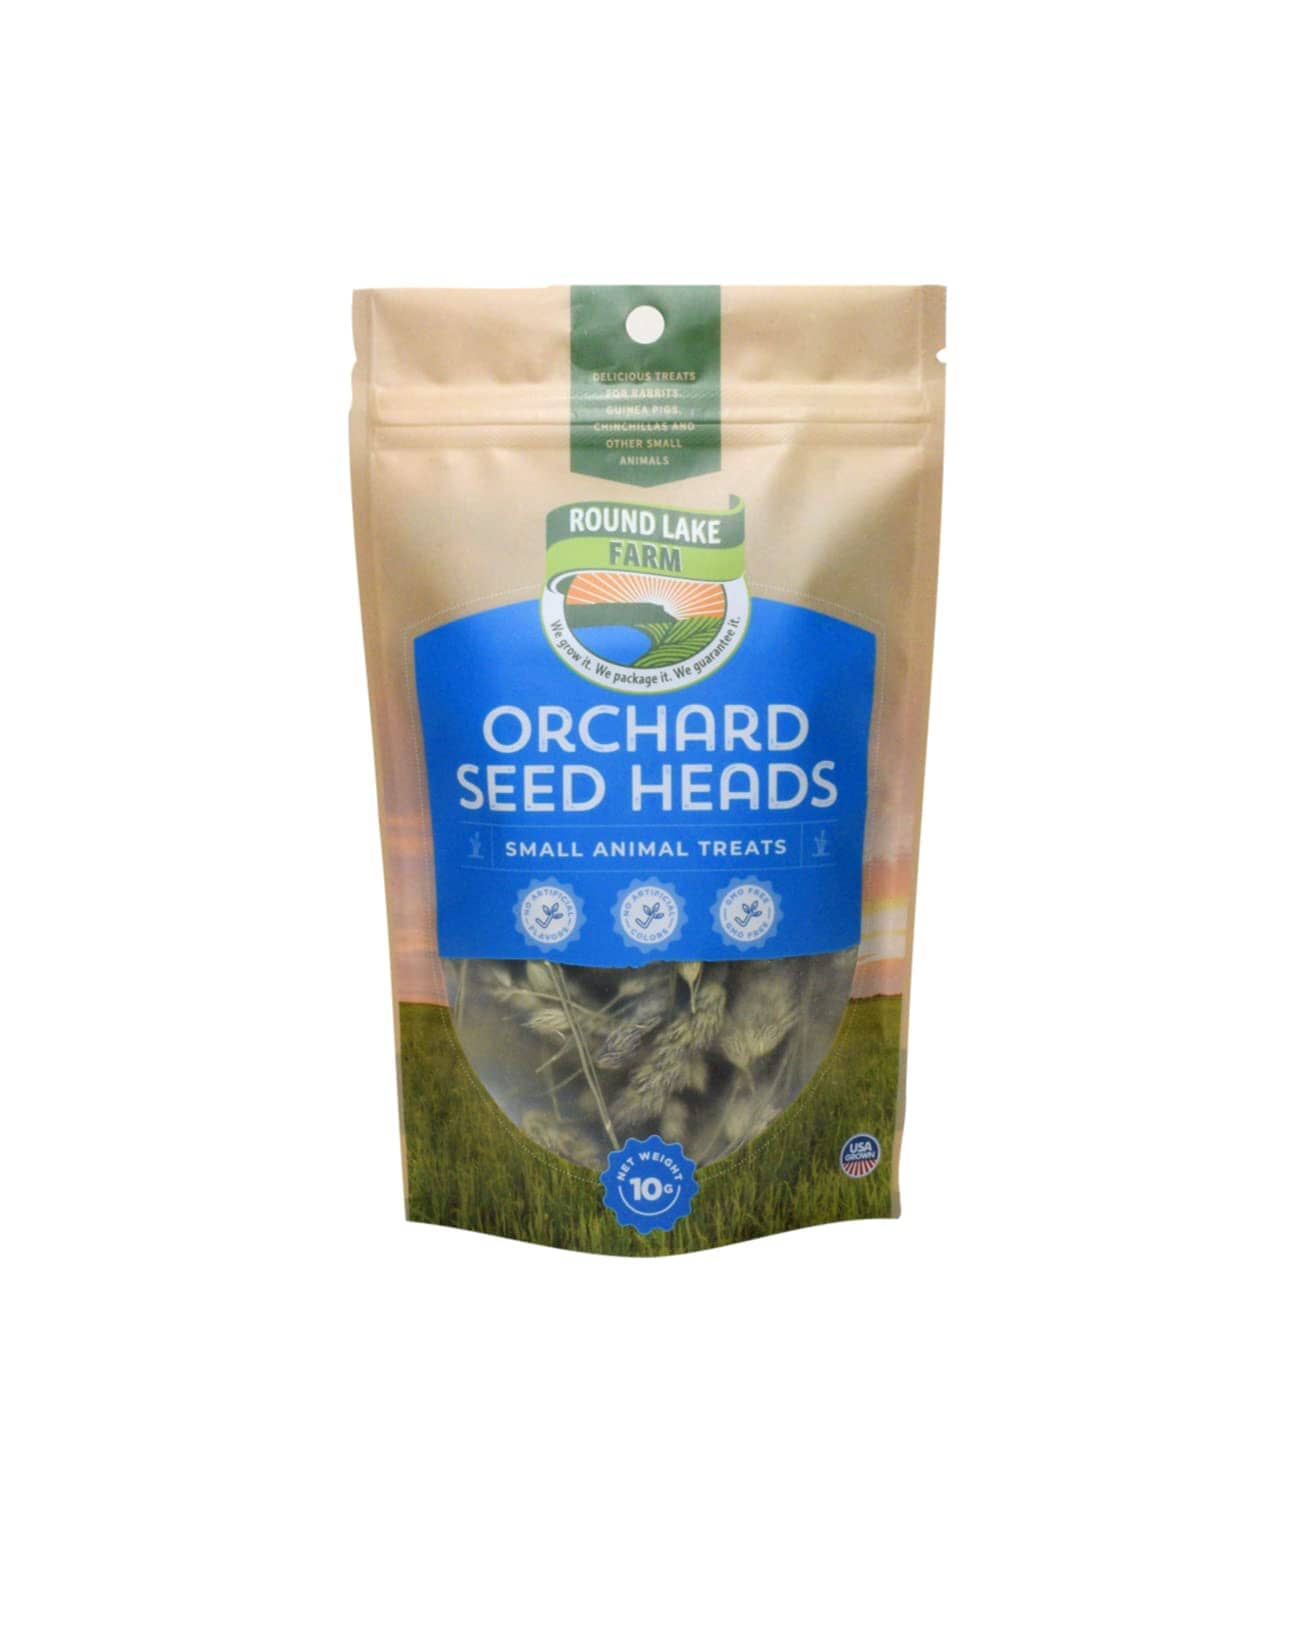 Round Lake Farms Orchard Seed Heads Small Animal Treats 10 g 